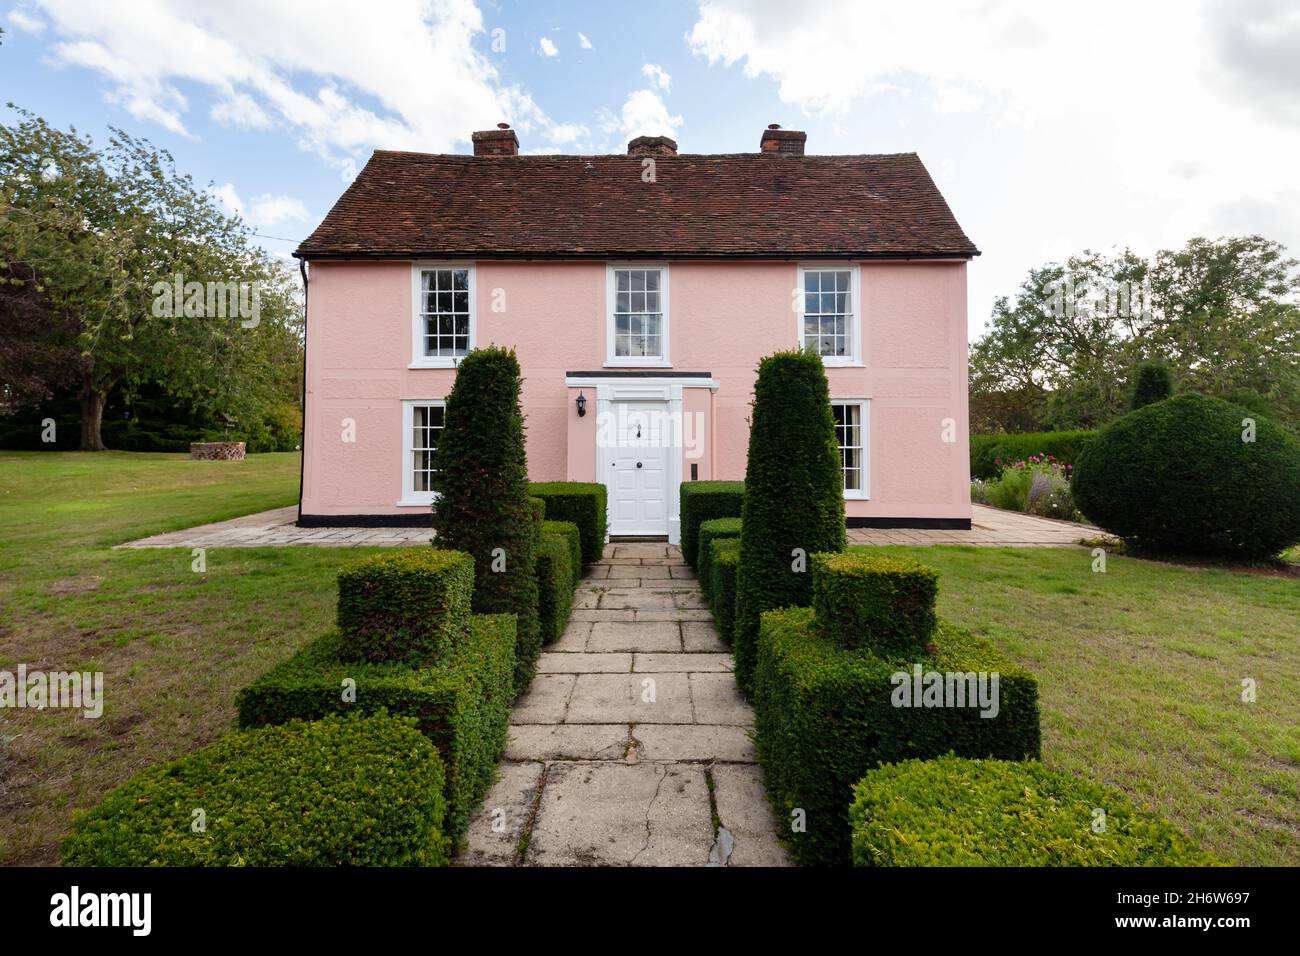 Wixoe, England - September 26 2019: Pink coloured country detached farmhouse with clipped shrubs and pathway leading to the from door and lawns to eit Stock Photo